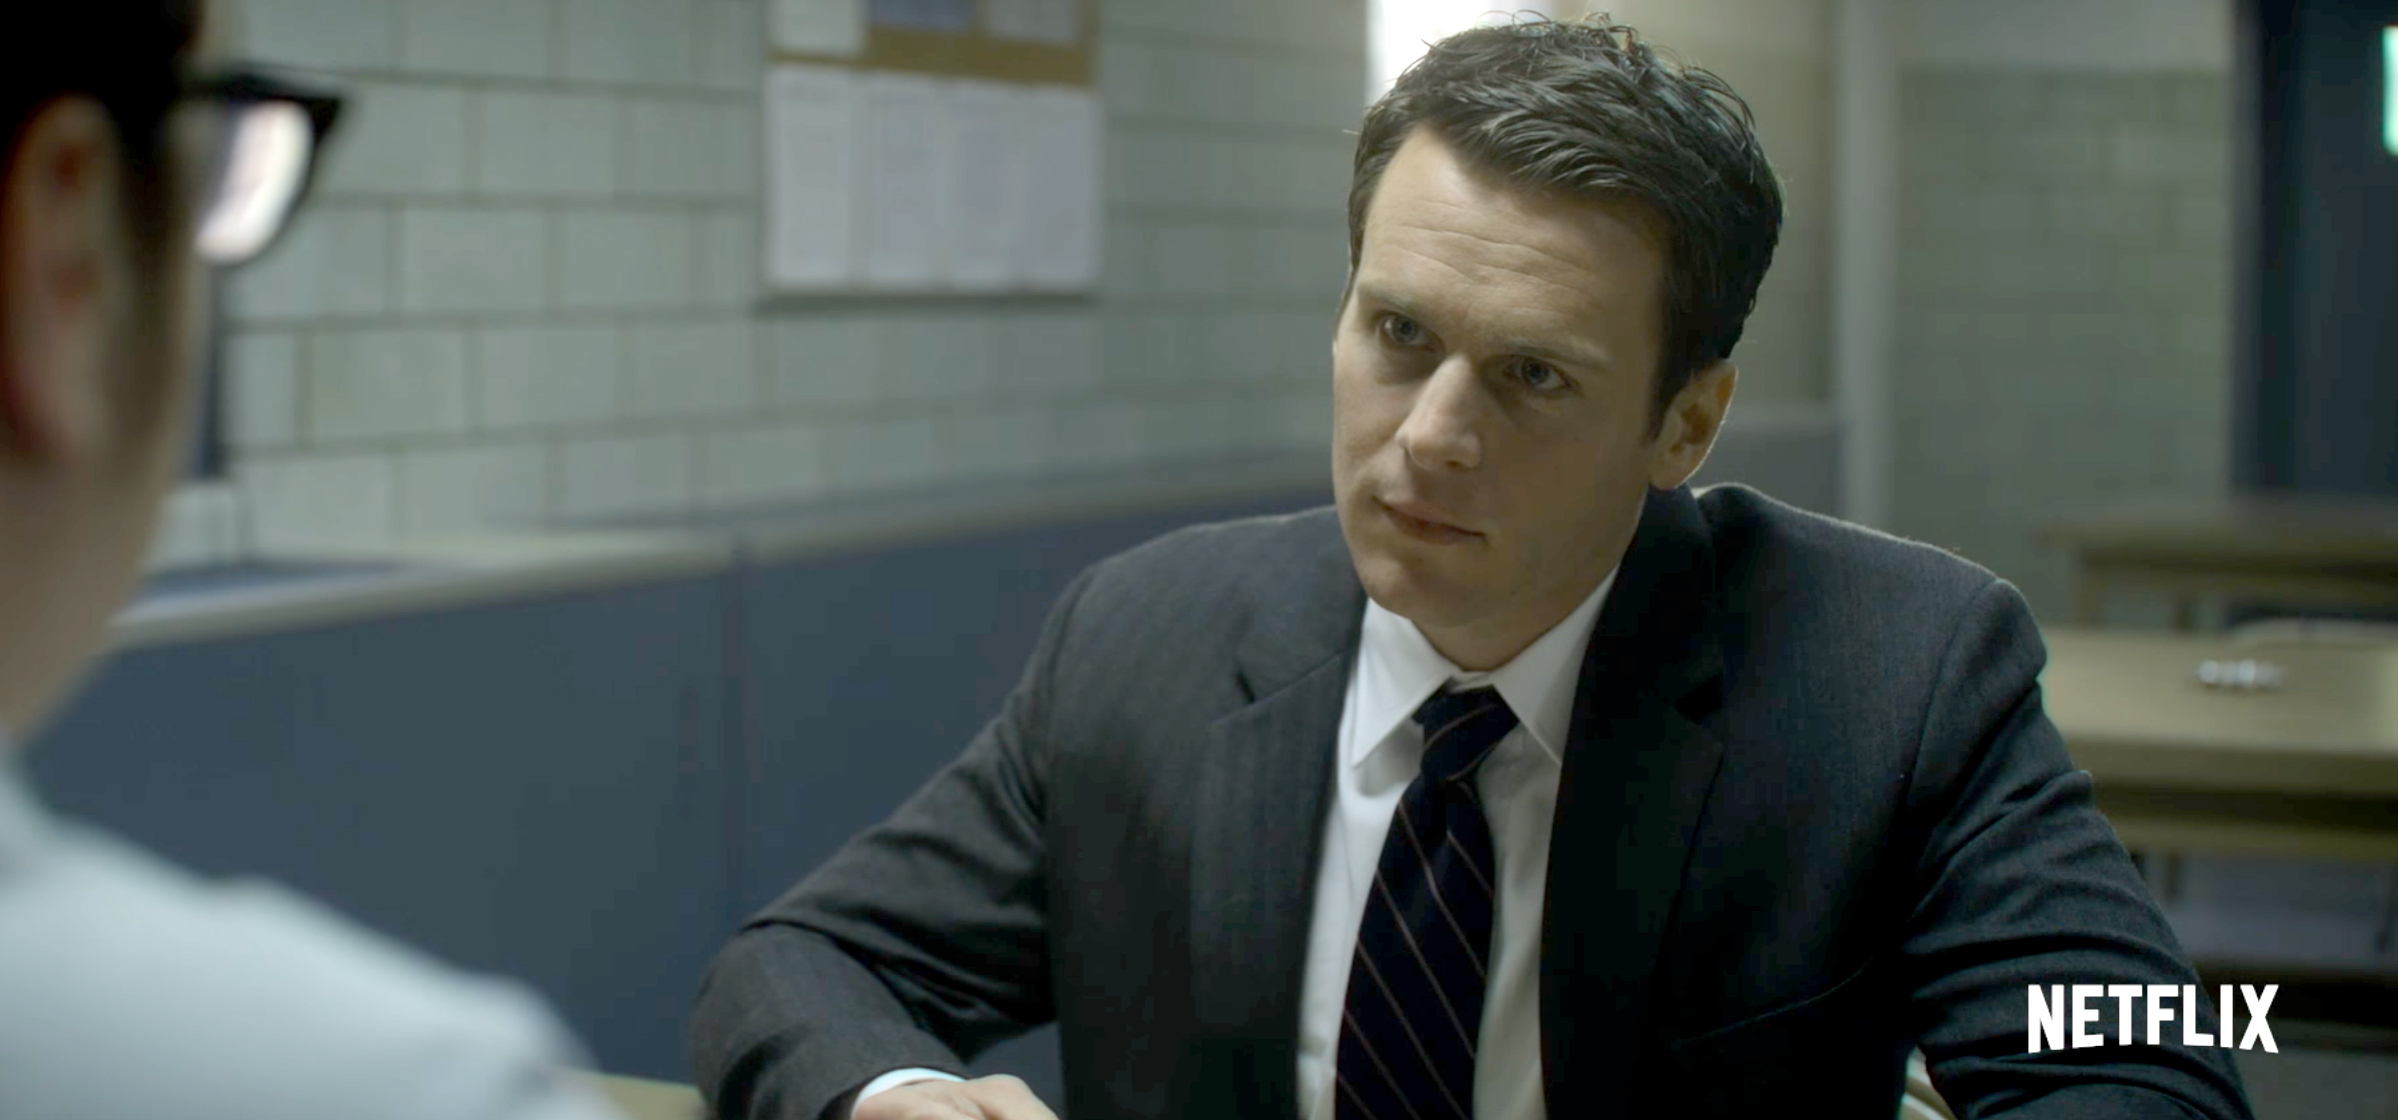 Mindhunter Drove Me Crazy - The Cornell Daily Sun